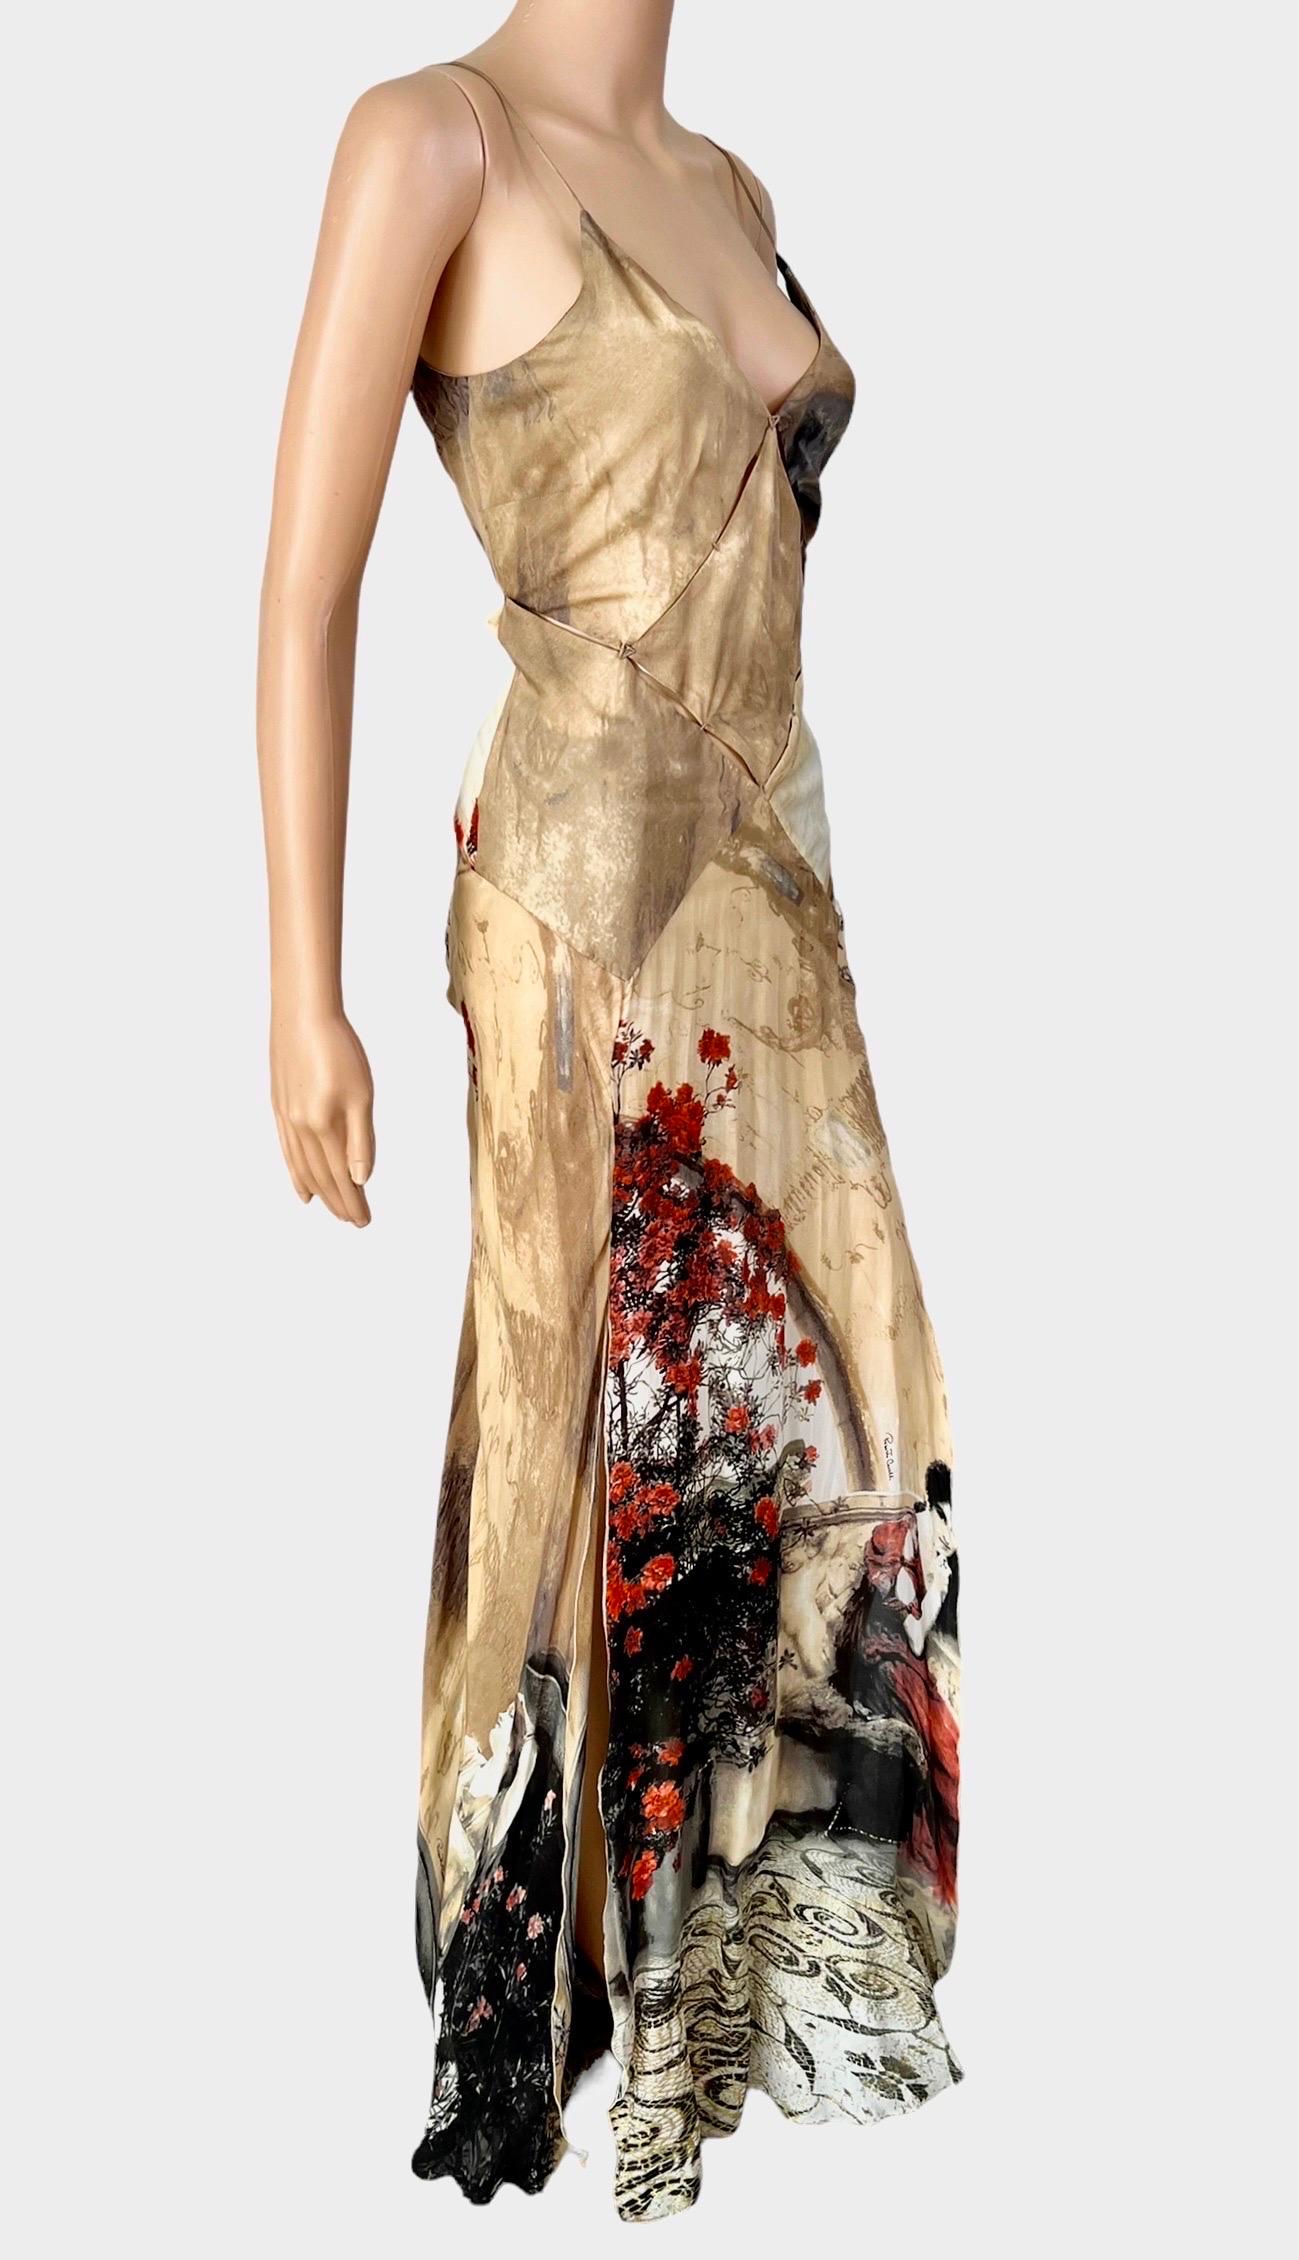 Roberto Cavalli S/S 2004 Runway Plunged Décolleté Cutout High Slit Silk Slip Evening Dress Gown Size M

Look 27 from the Spring 2004 Collection.
